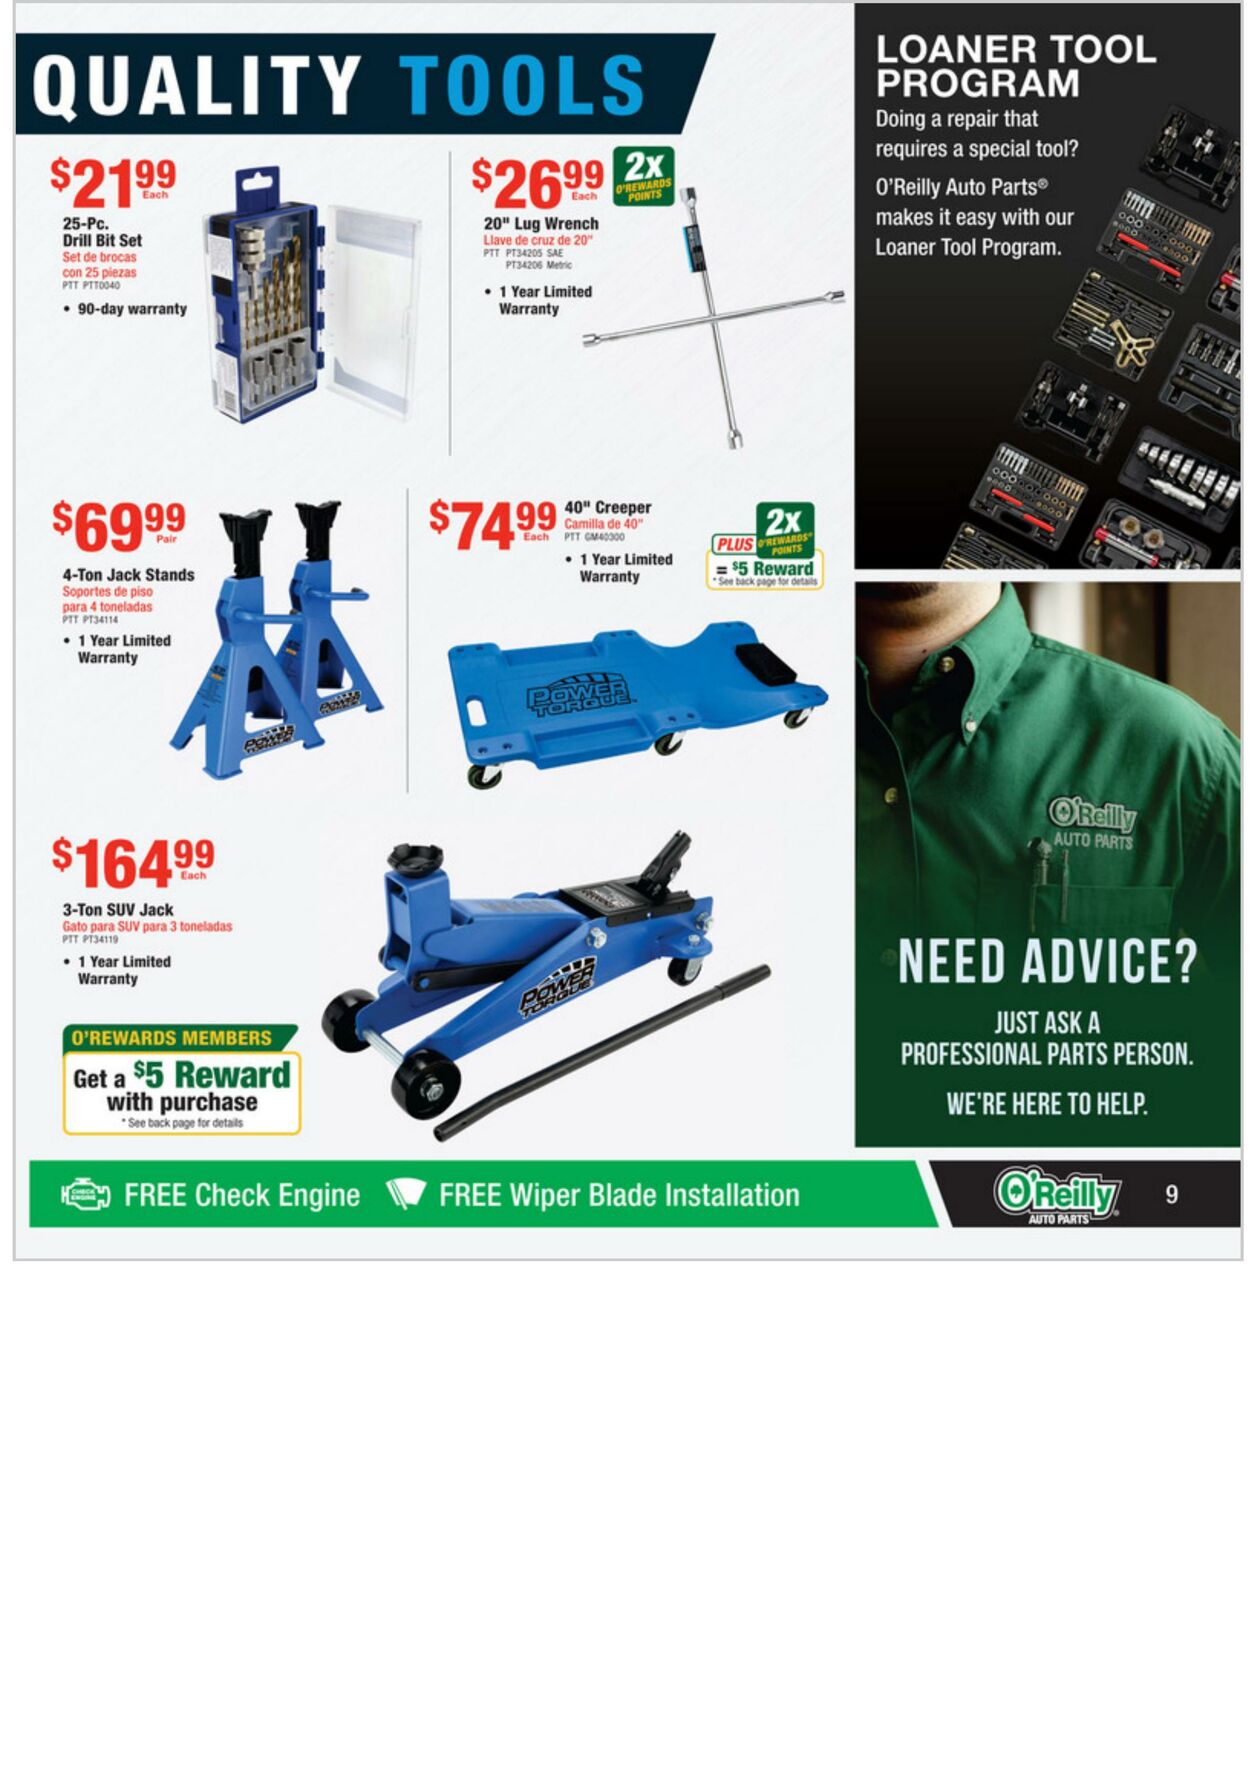 Weekly ad O’Reilly Auto Parts 12/28/2022 - 01/24/2023